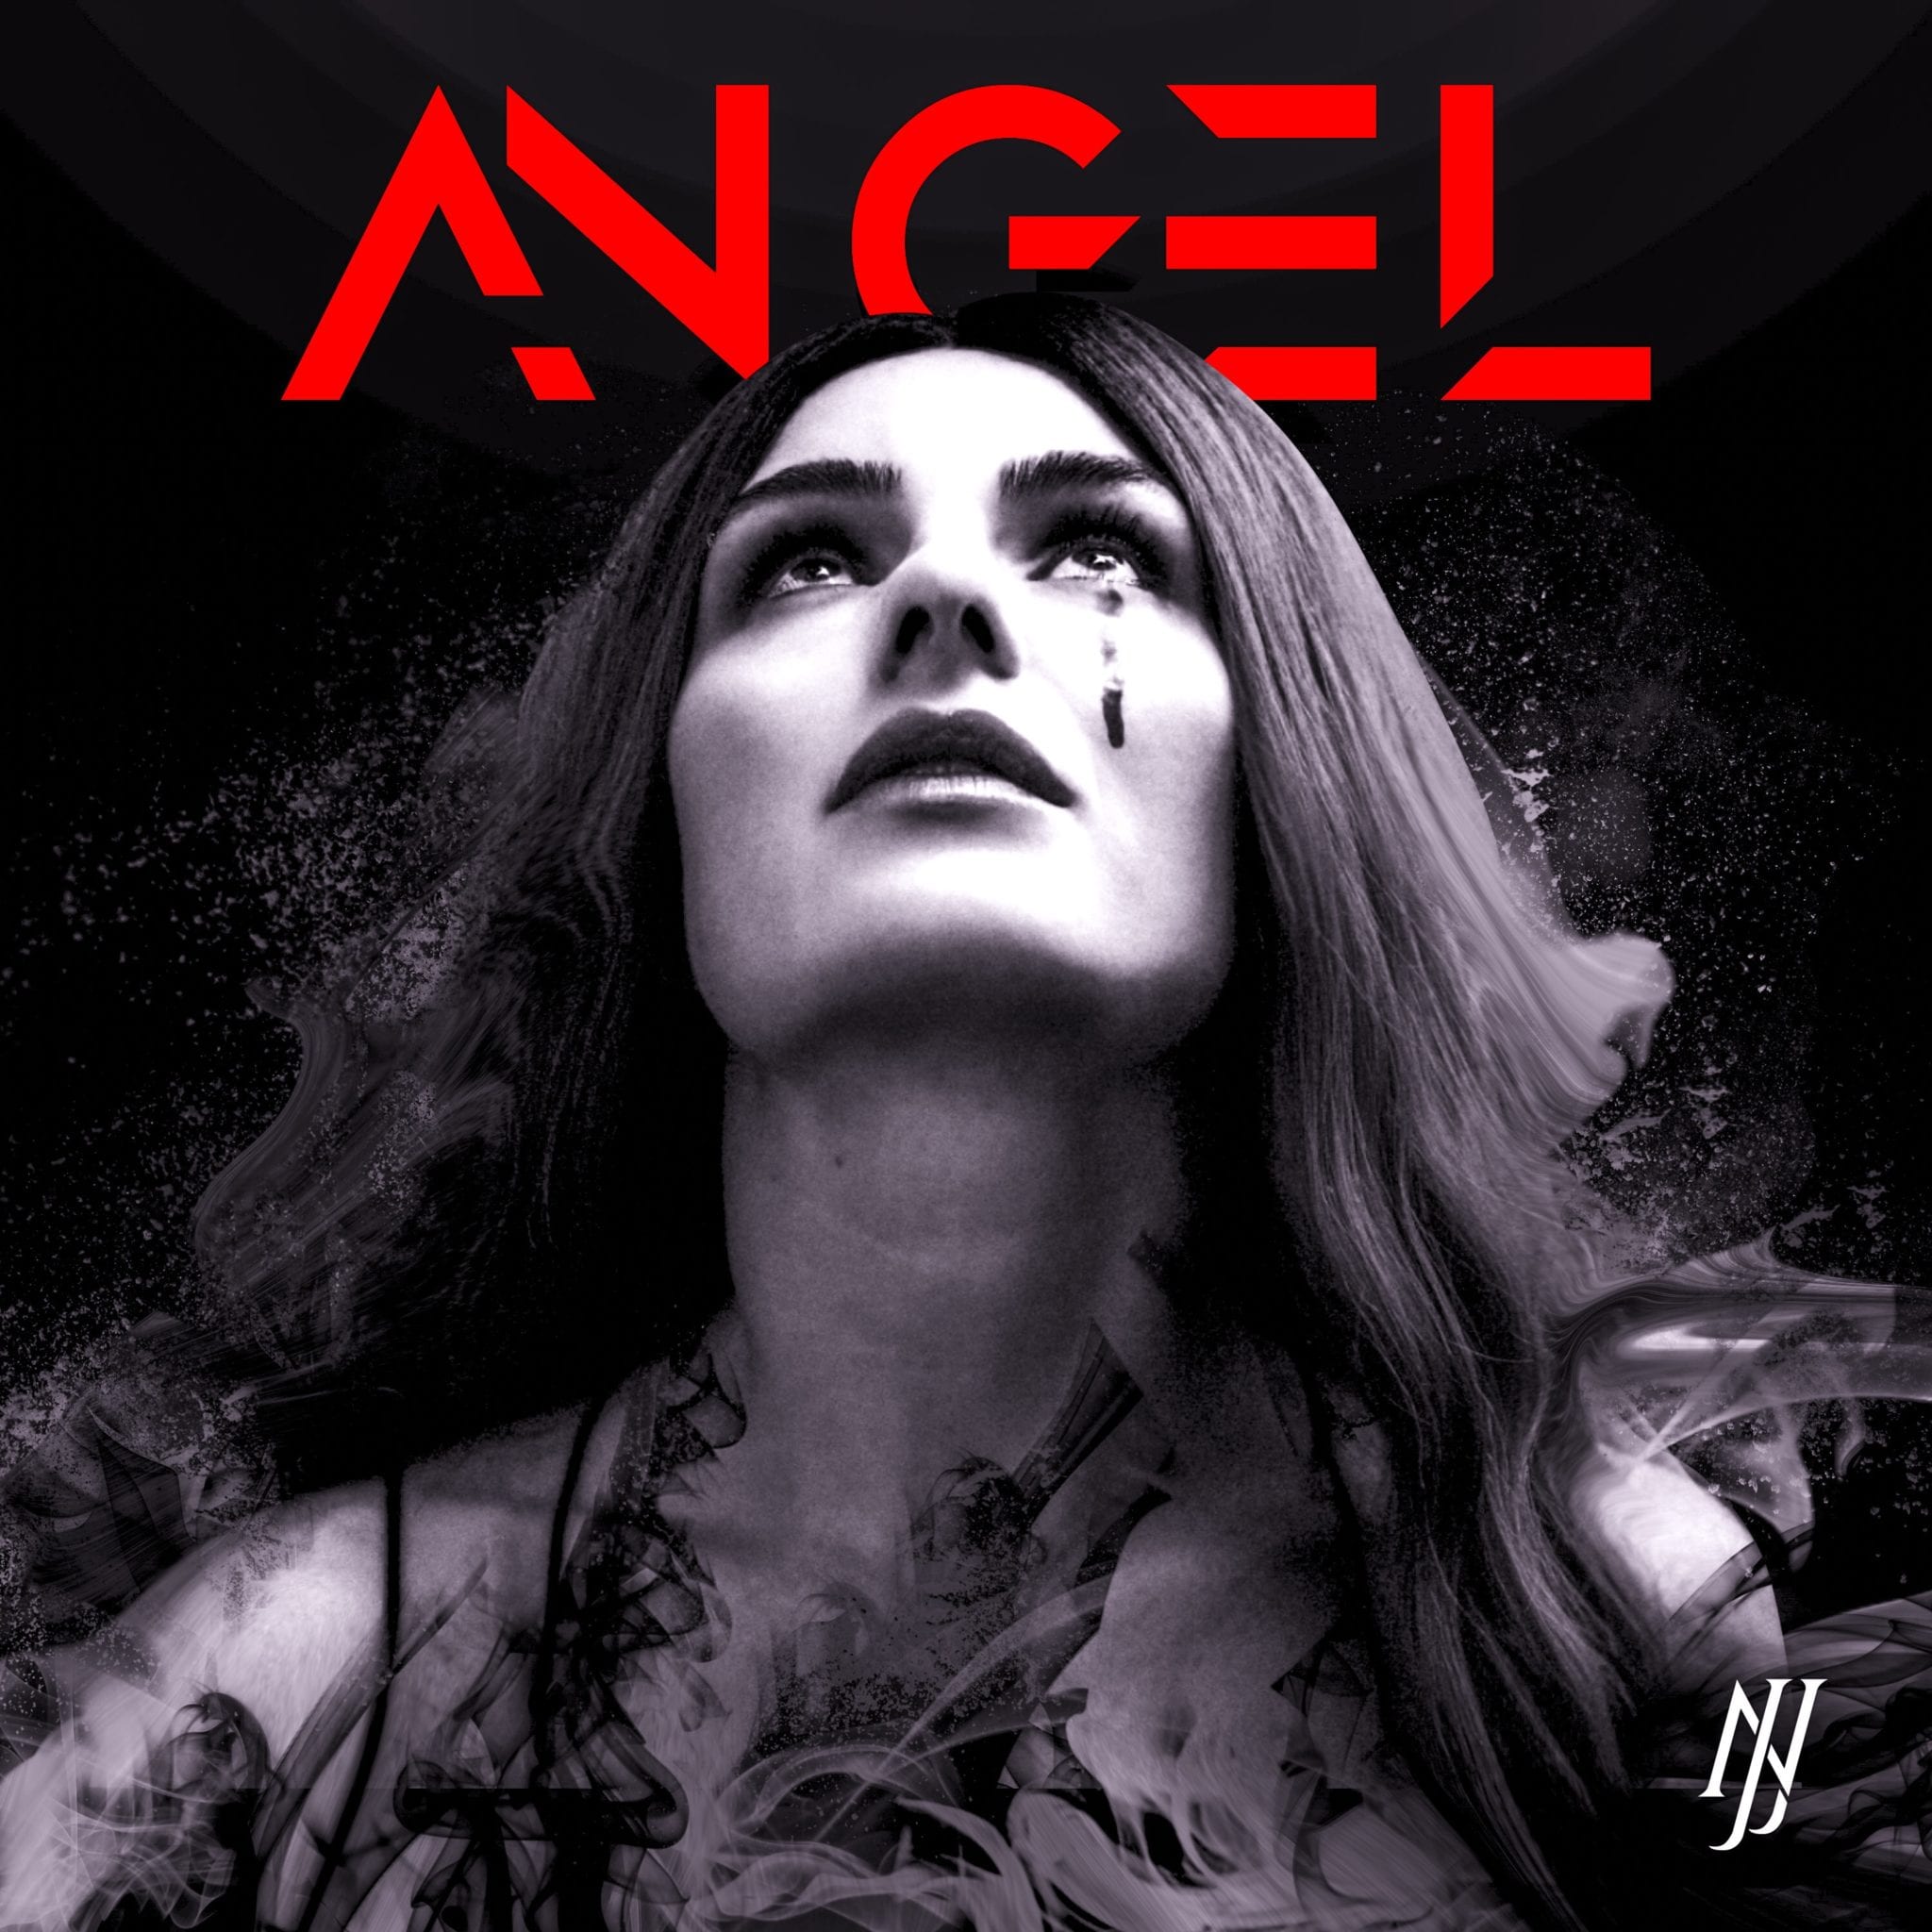 ANGELCOVER